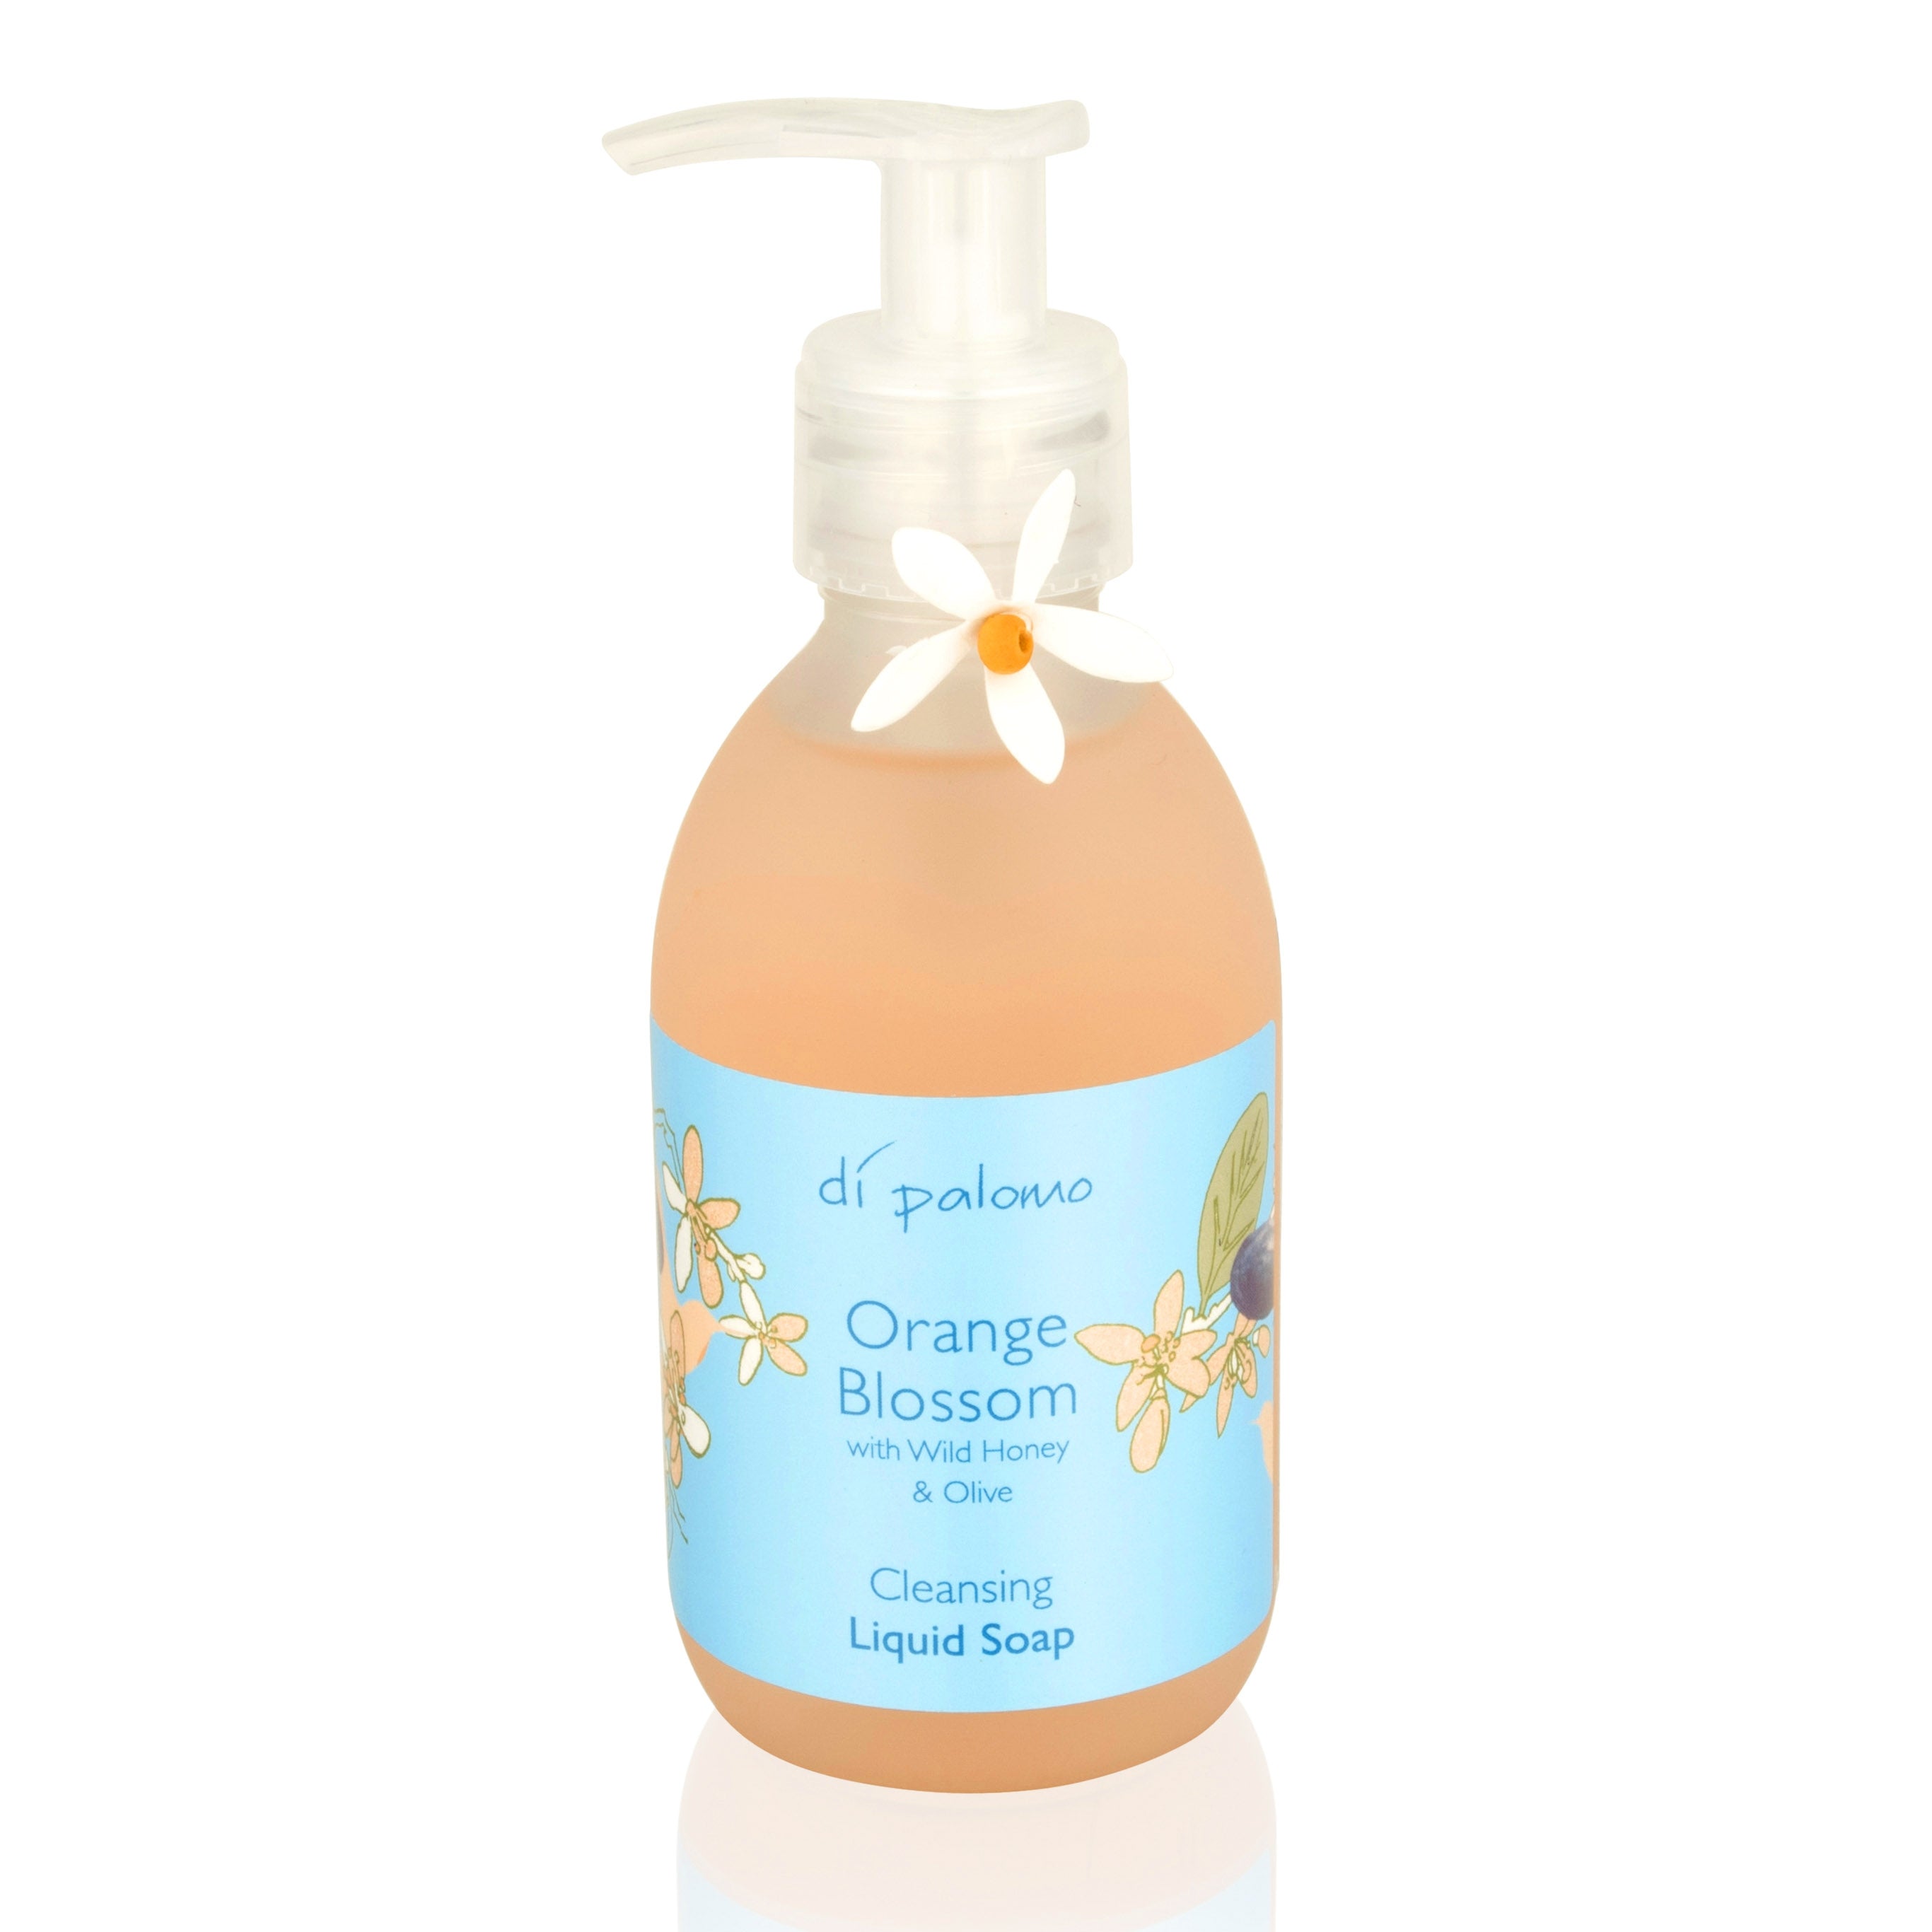 A luxurious, antibacterial hand wash, containing the finest ingredients to cleanse and refresh your hands. Fragranced with Orange Blossom to complement our Protective Hand & Nail Cream.